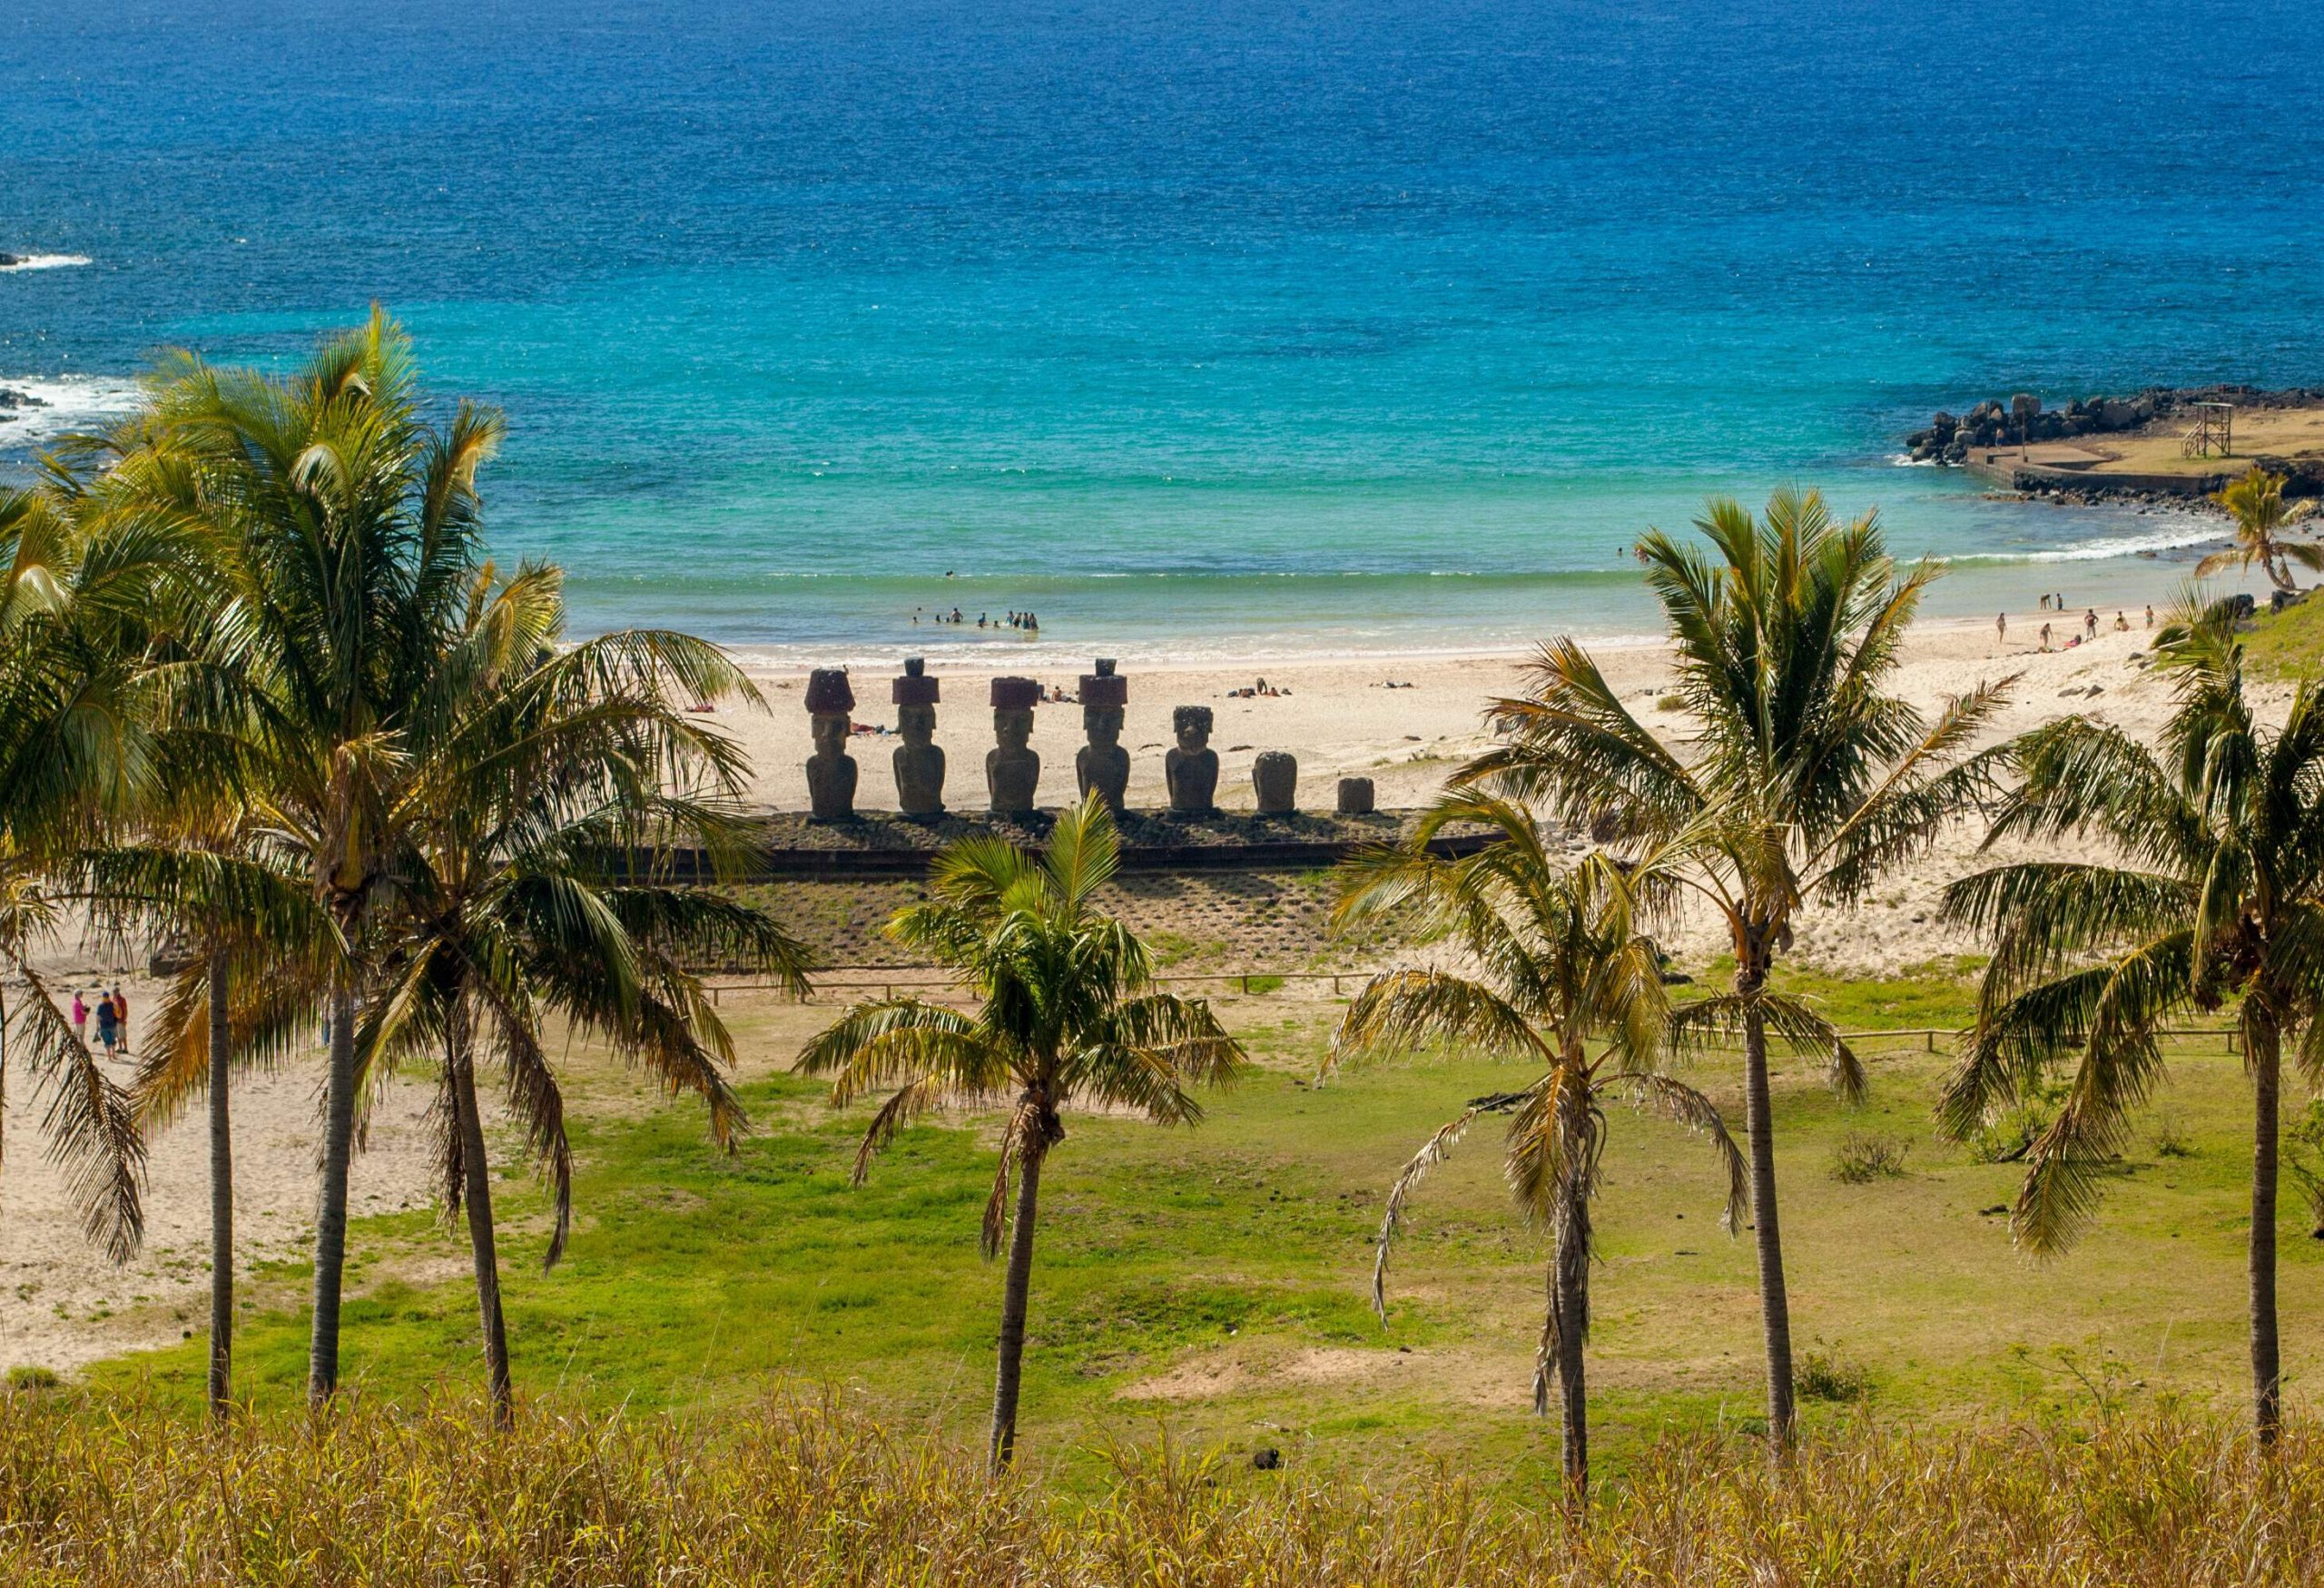 Coconut trees scattered across a grassy area along the beach, with a row sculpted figures on the sand.